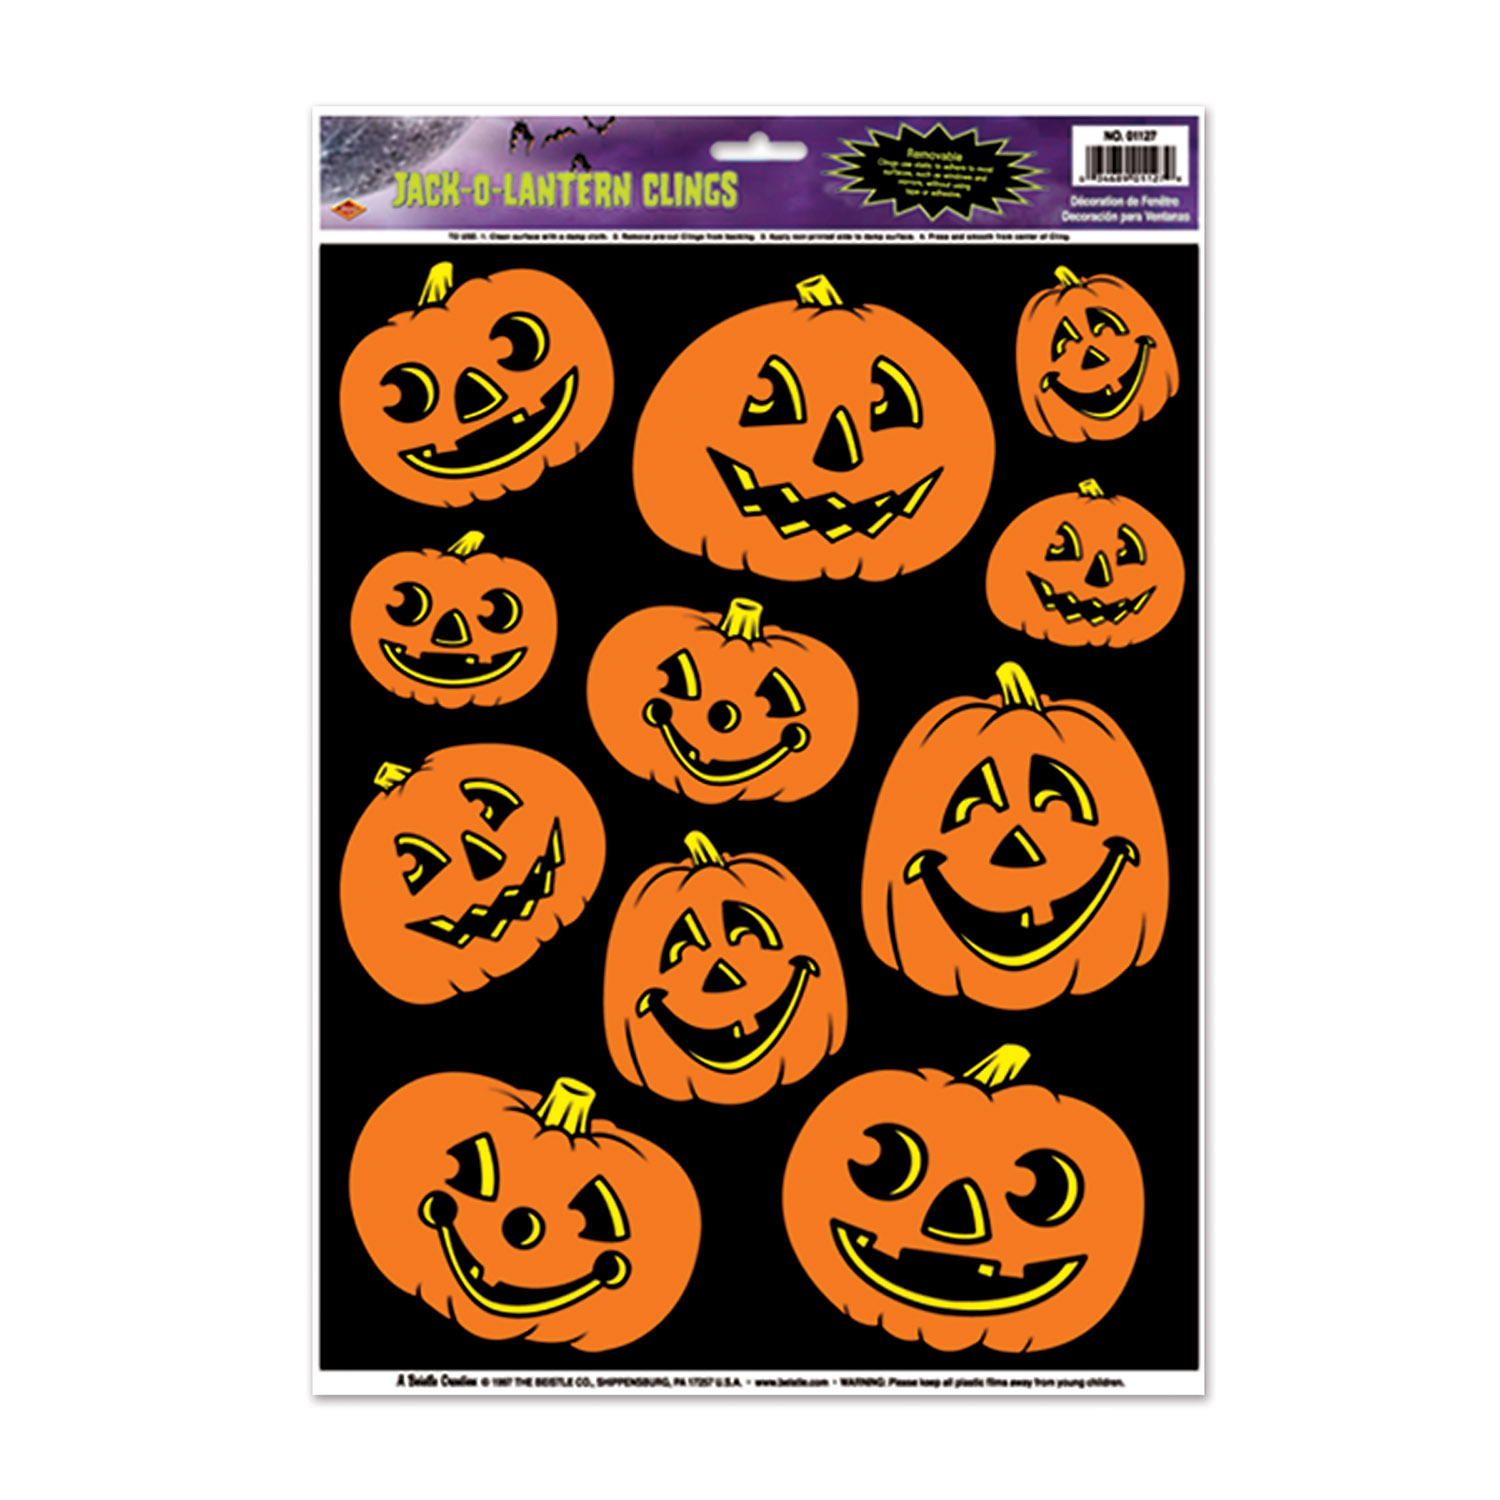 12 Pieces JacK-O-Lantern Clings - Hanging Decorations & Cut Out - at ...